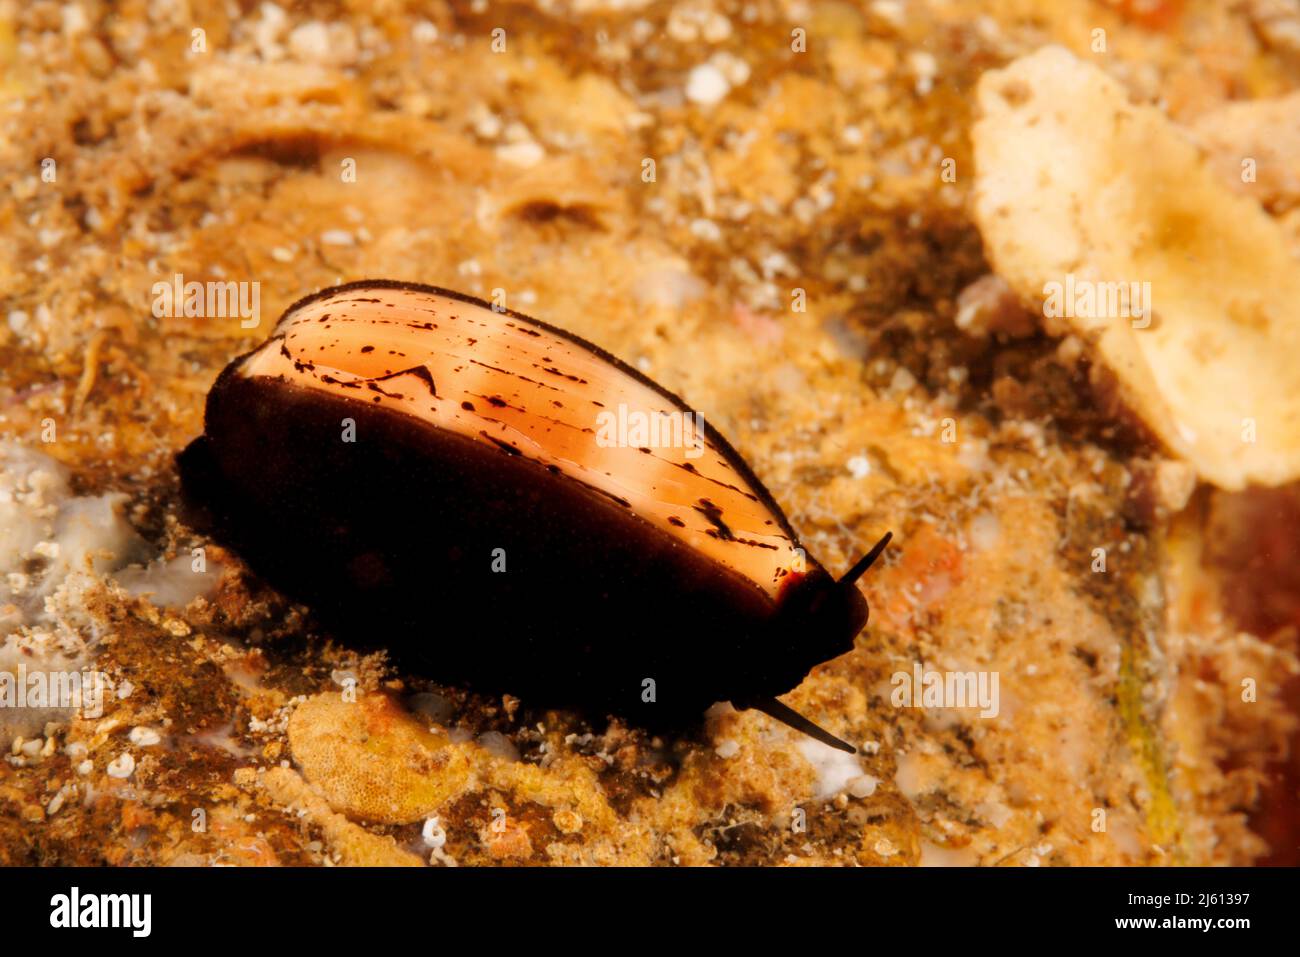 The Isabella's cowry, Cypraea isabella, with the animal partially covering the shell. Hawaii. Stock Photo